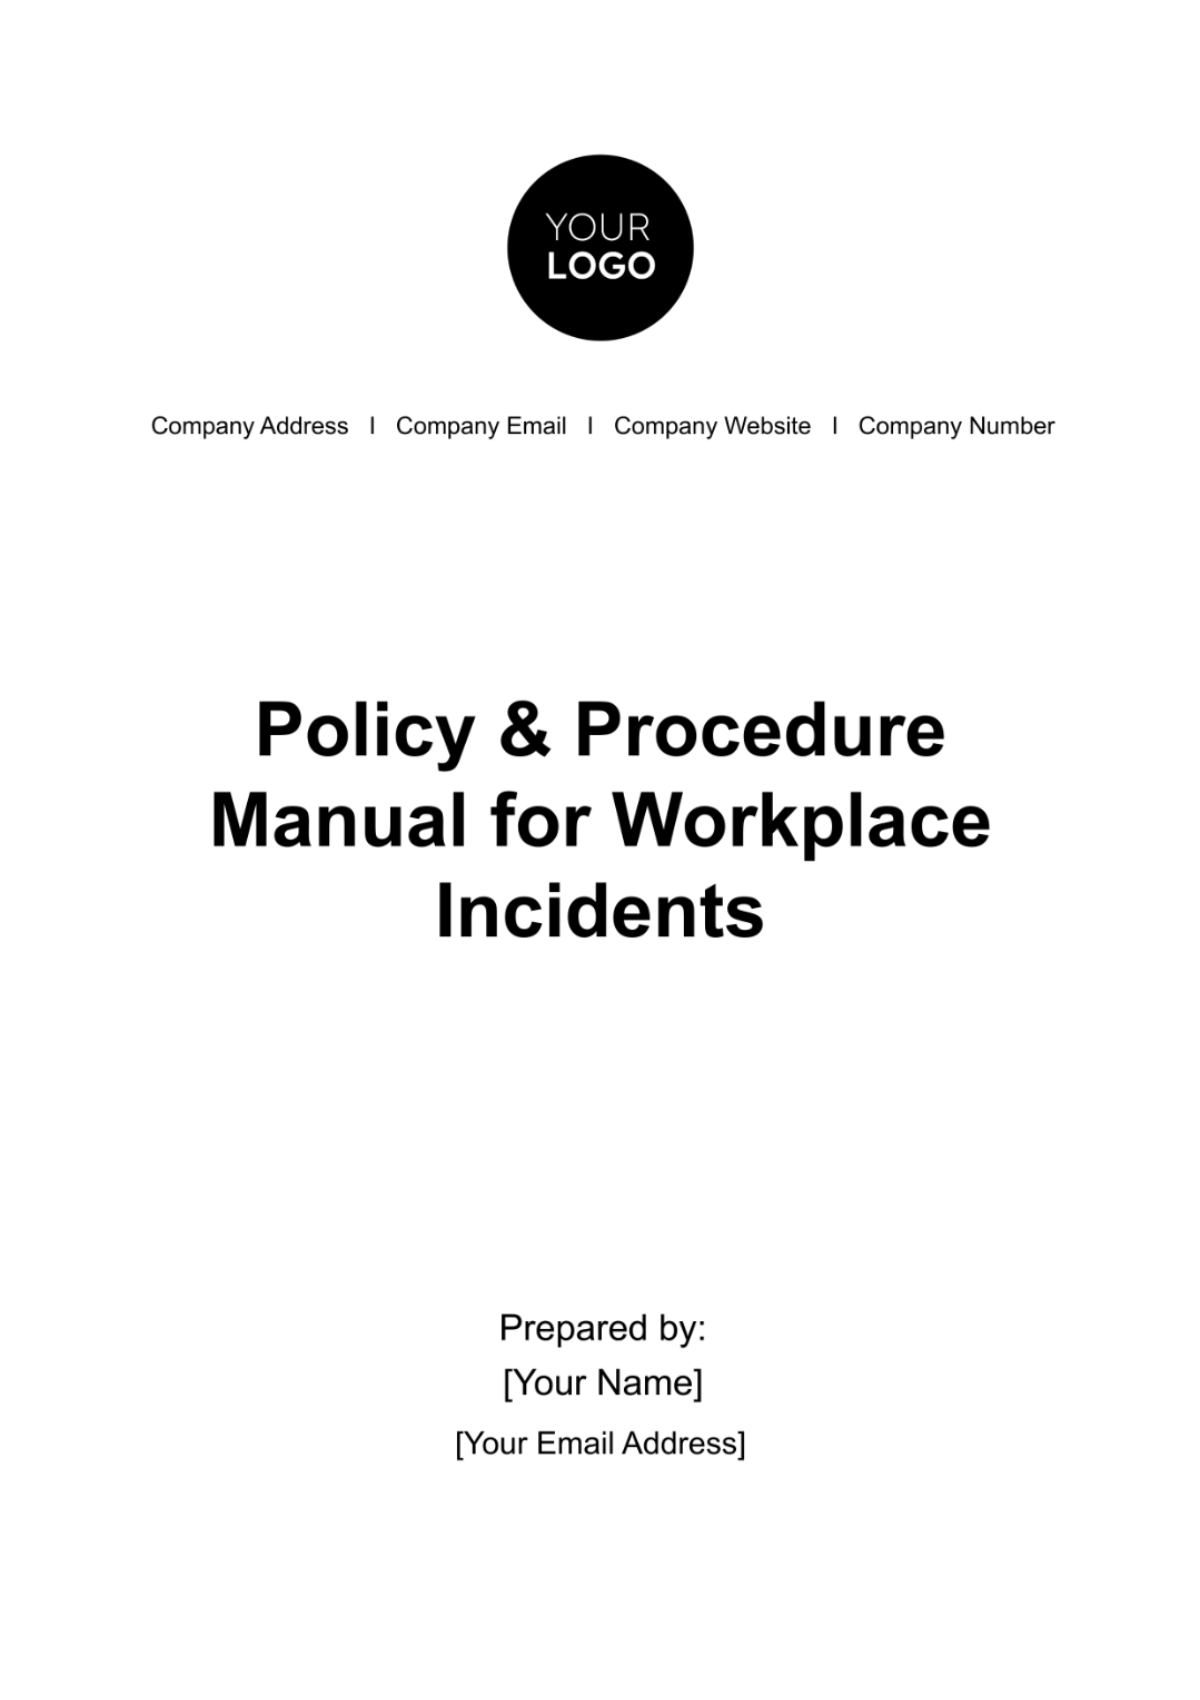 Free Policy & Procedure Manual for Workplace Incidents HR Template